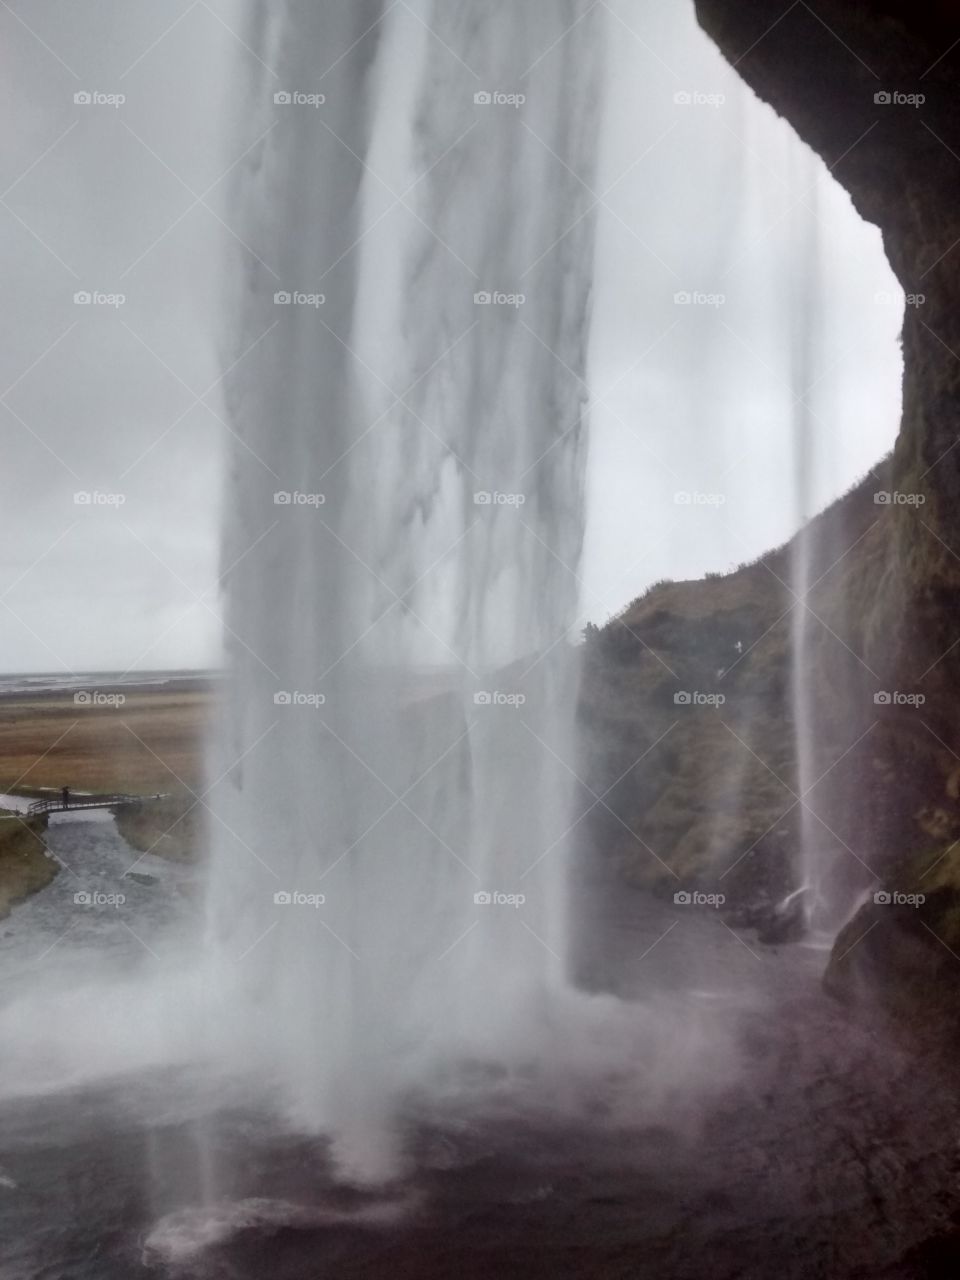 One of Iceland's largest waterfalls pictured from behind the fall.